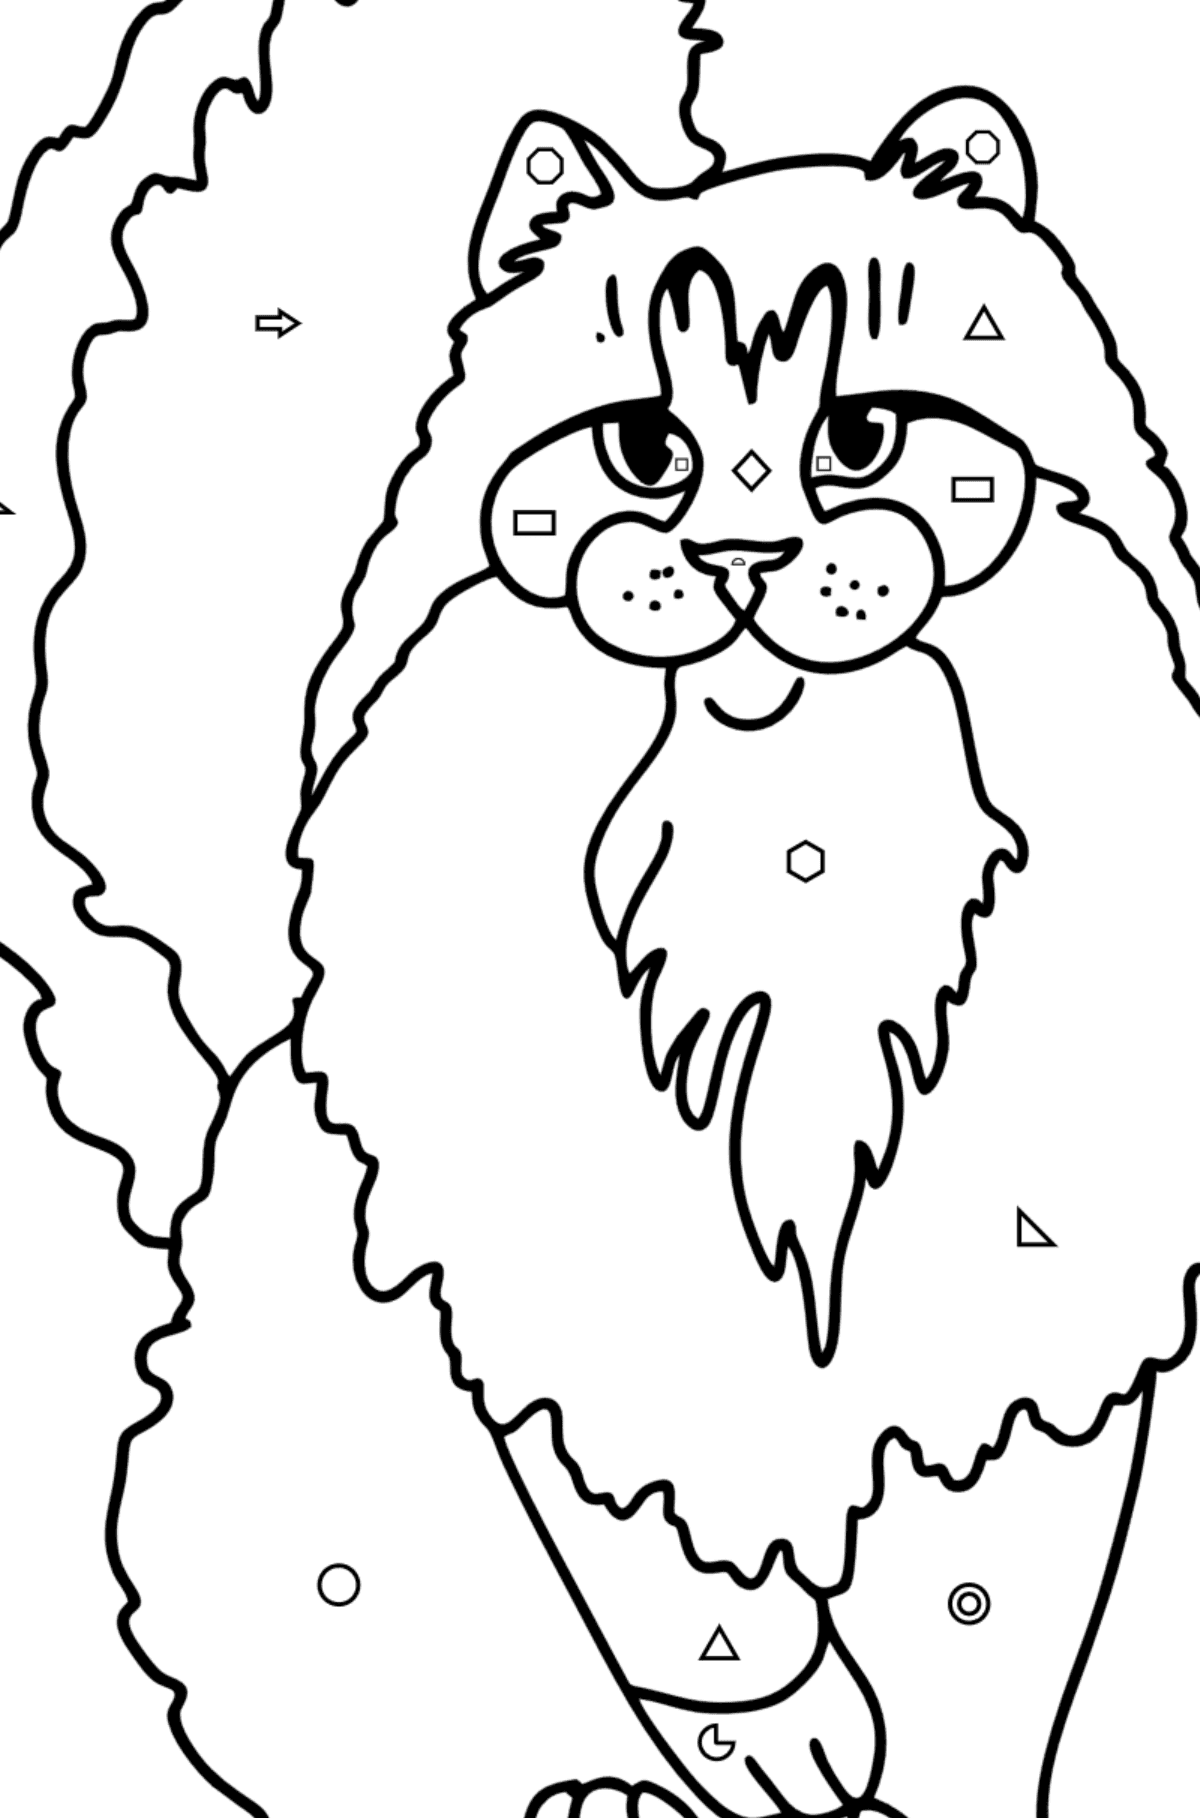 Norwegian Forest Cat coloring page - Coloring by Geometric Shapes for Kids